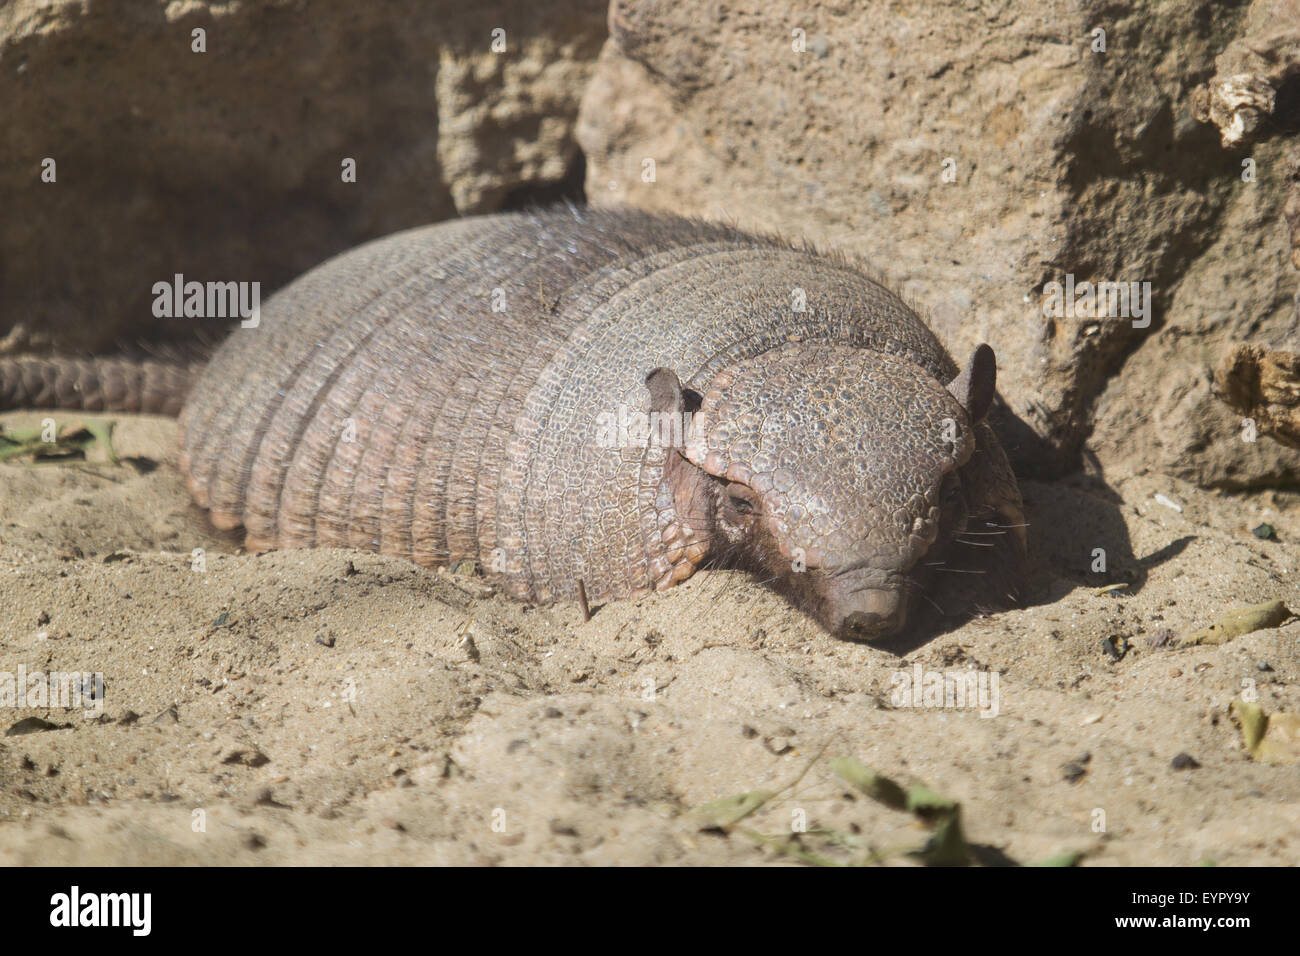 A big hairy armadillo, Chaetophractus villosus, resting on the sand in a sunny day Stock Photo